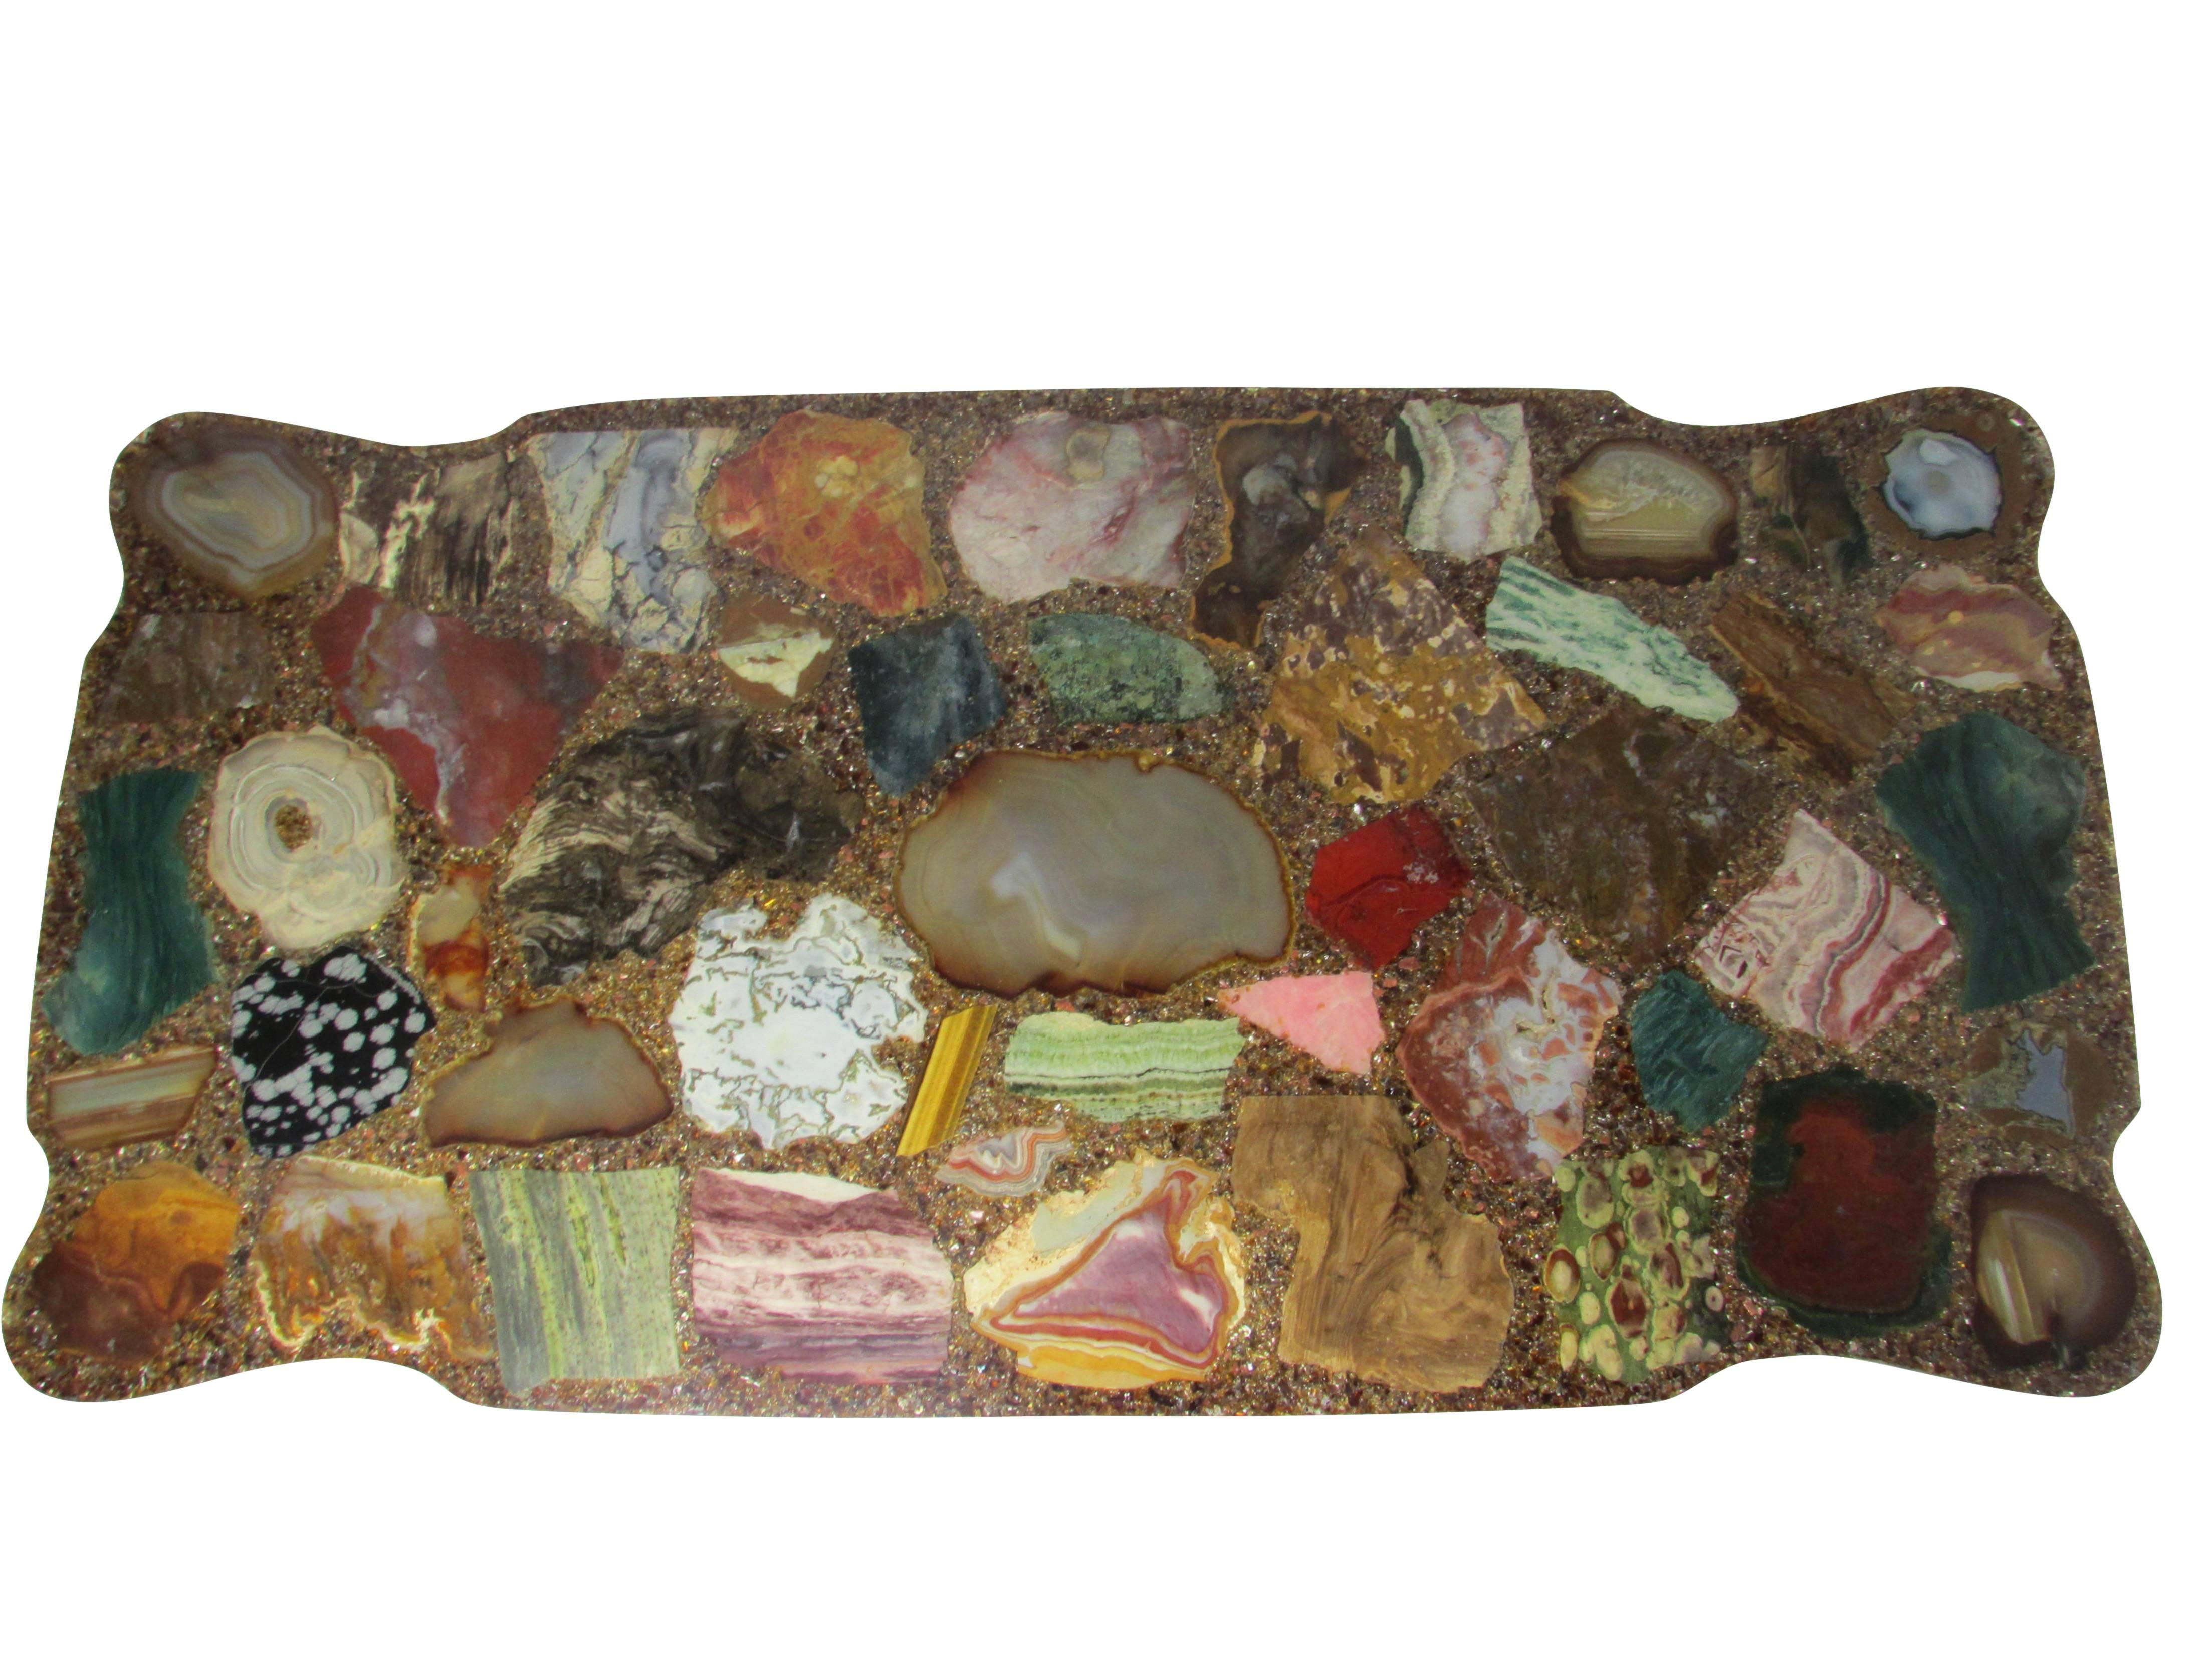 This is a unique Midcentury poured resin coffee table with an array of sliced geodes comprising the top.